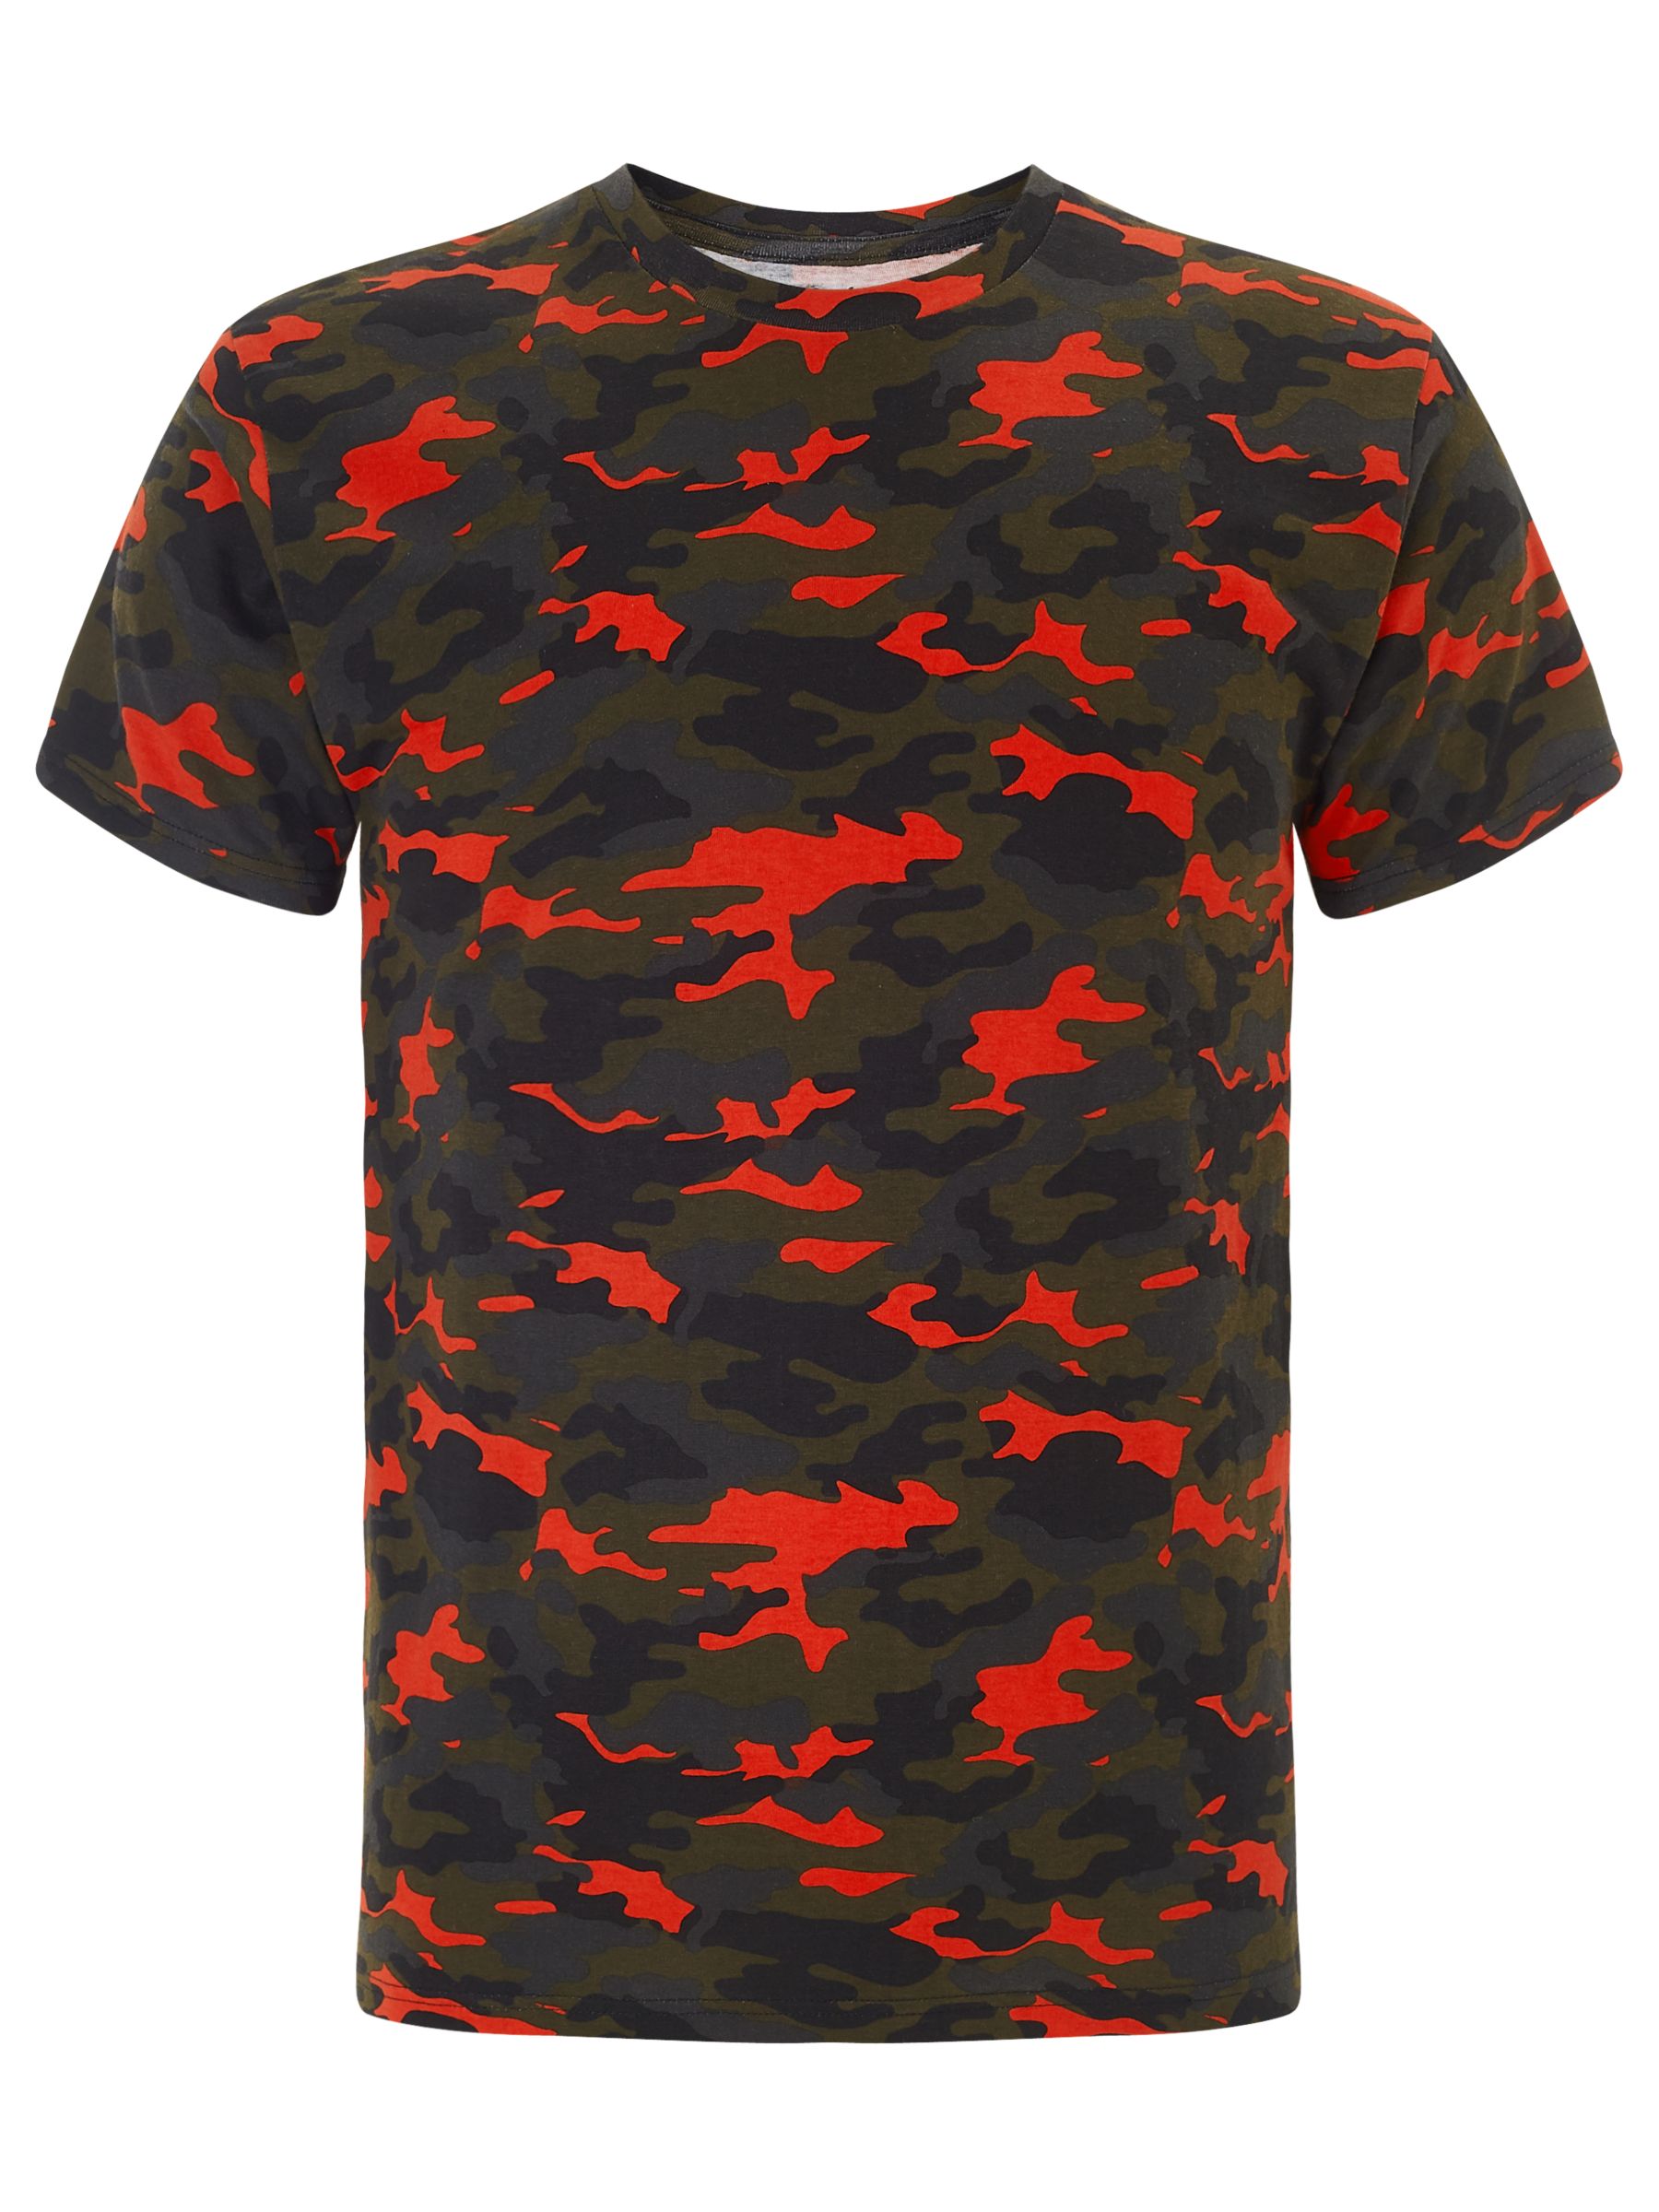 red camouflage shirt